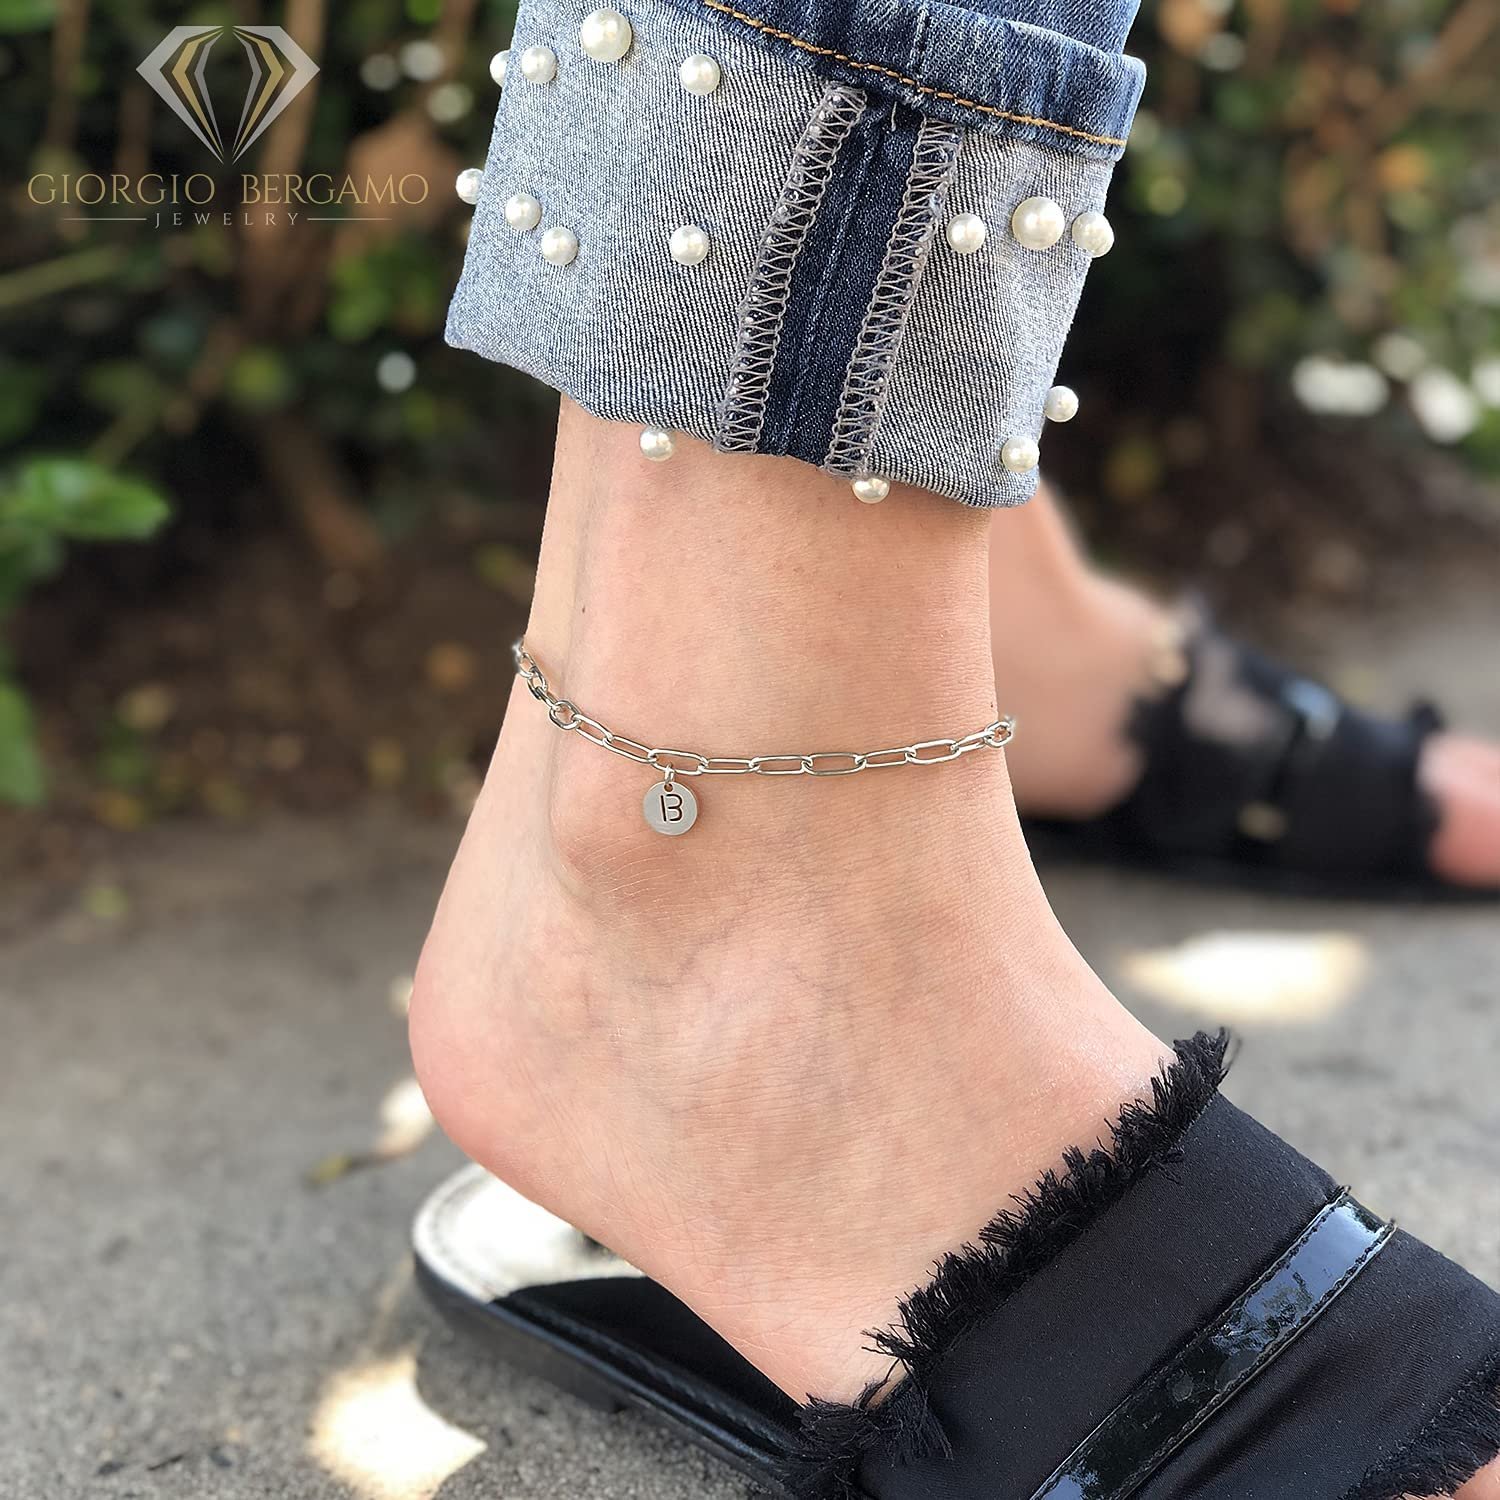 Giorgio Bergamo Stainless Steel White Gold Plated Paper Clip Initial Disc Anklet All 26 Letter Alphabet, Ankle Bracelet, S, Silver - image 3 of 4